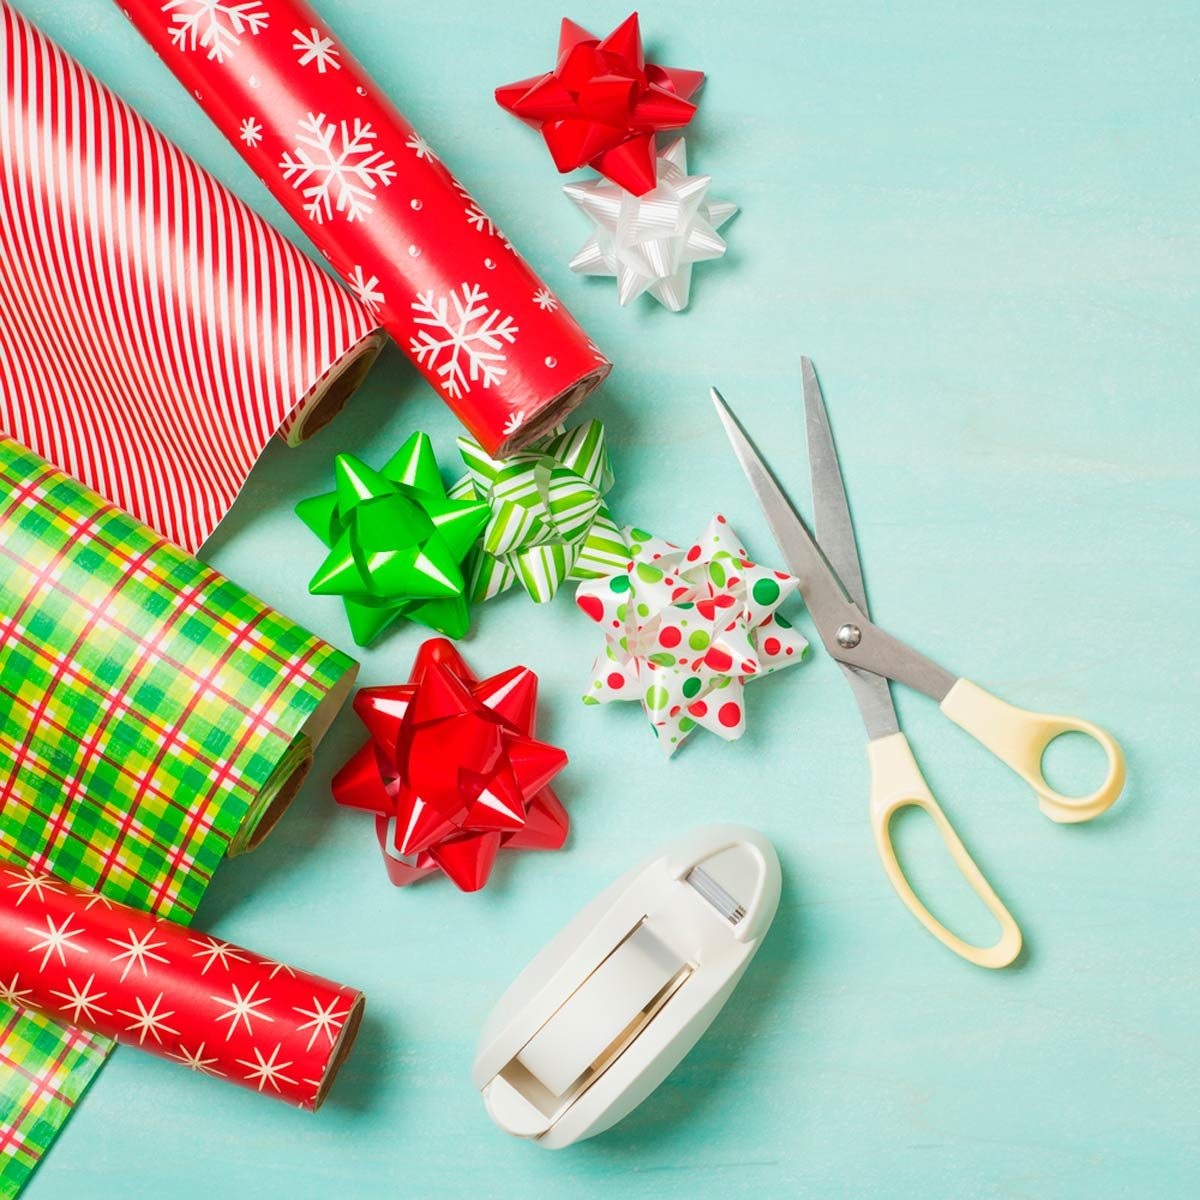 13 Things to Get at the Dollar Store for the Holidays